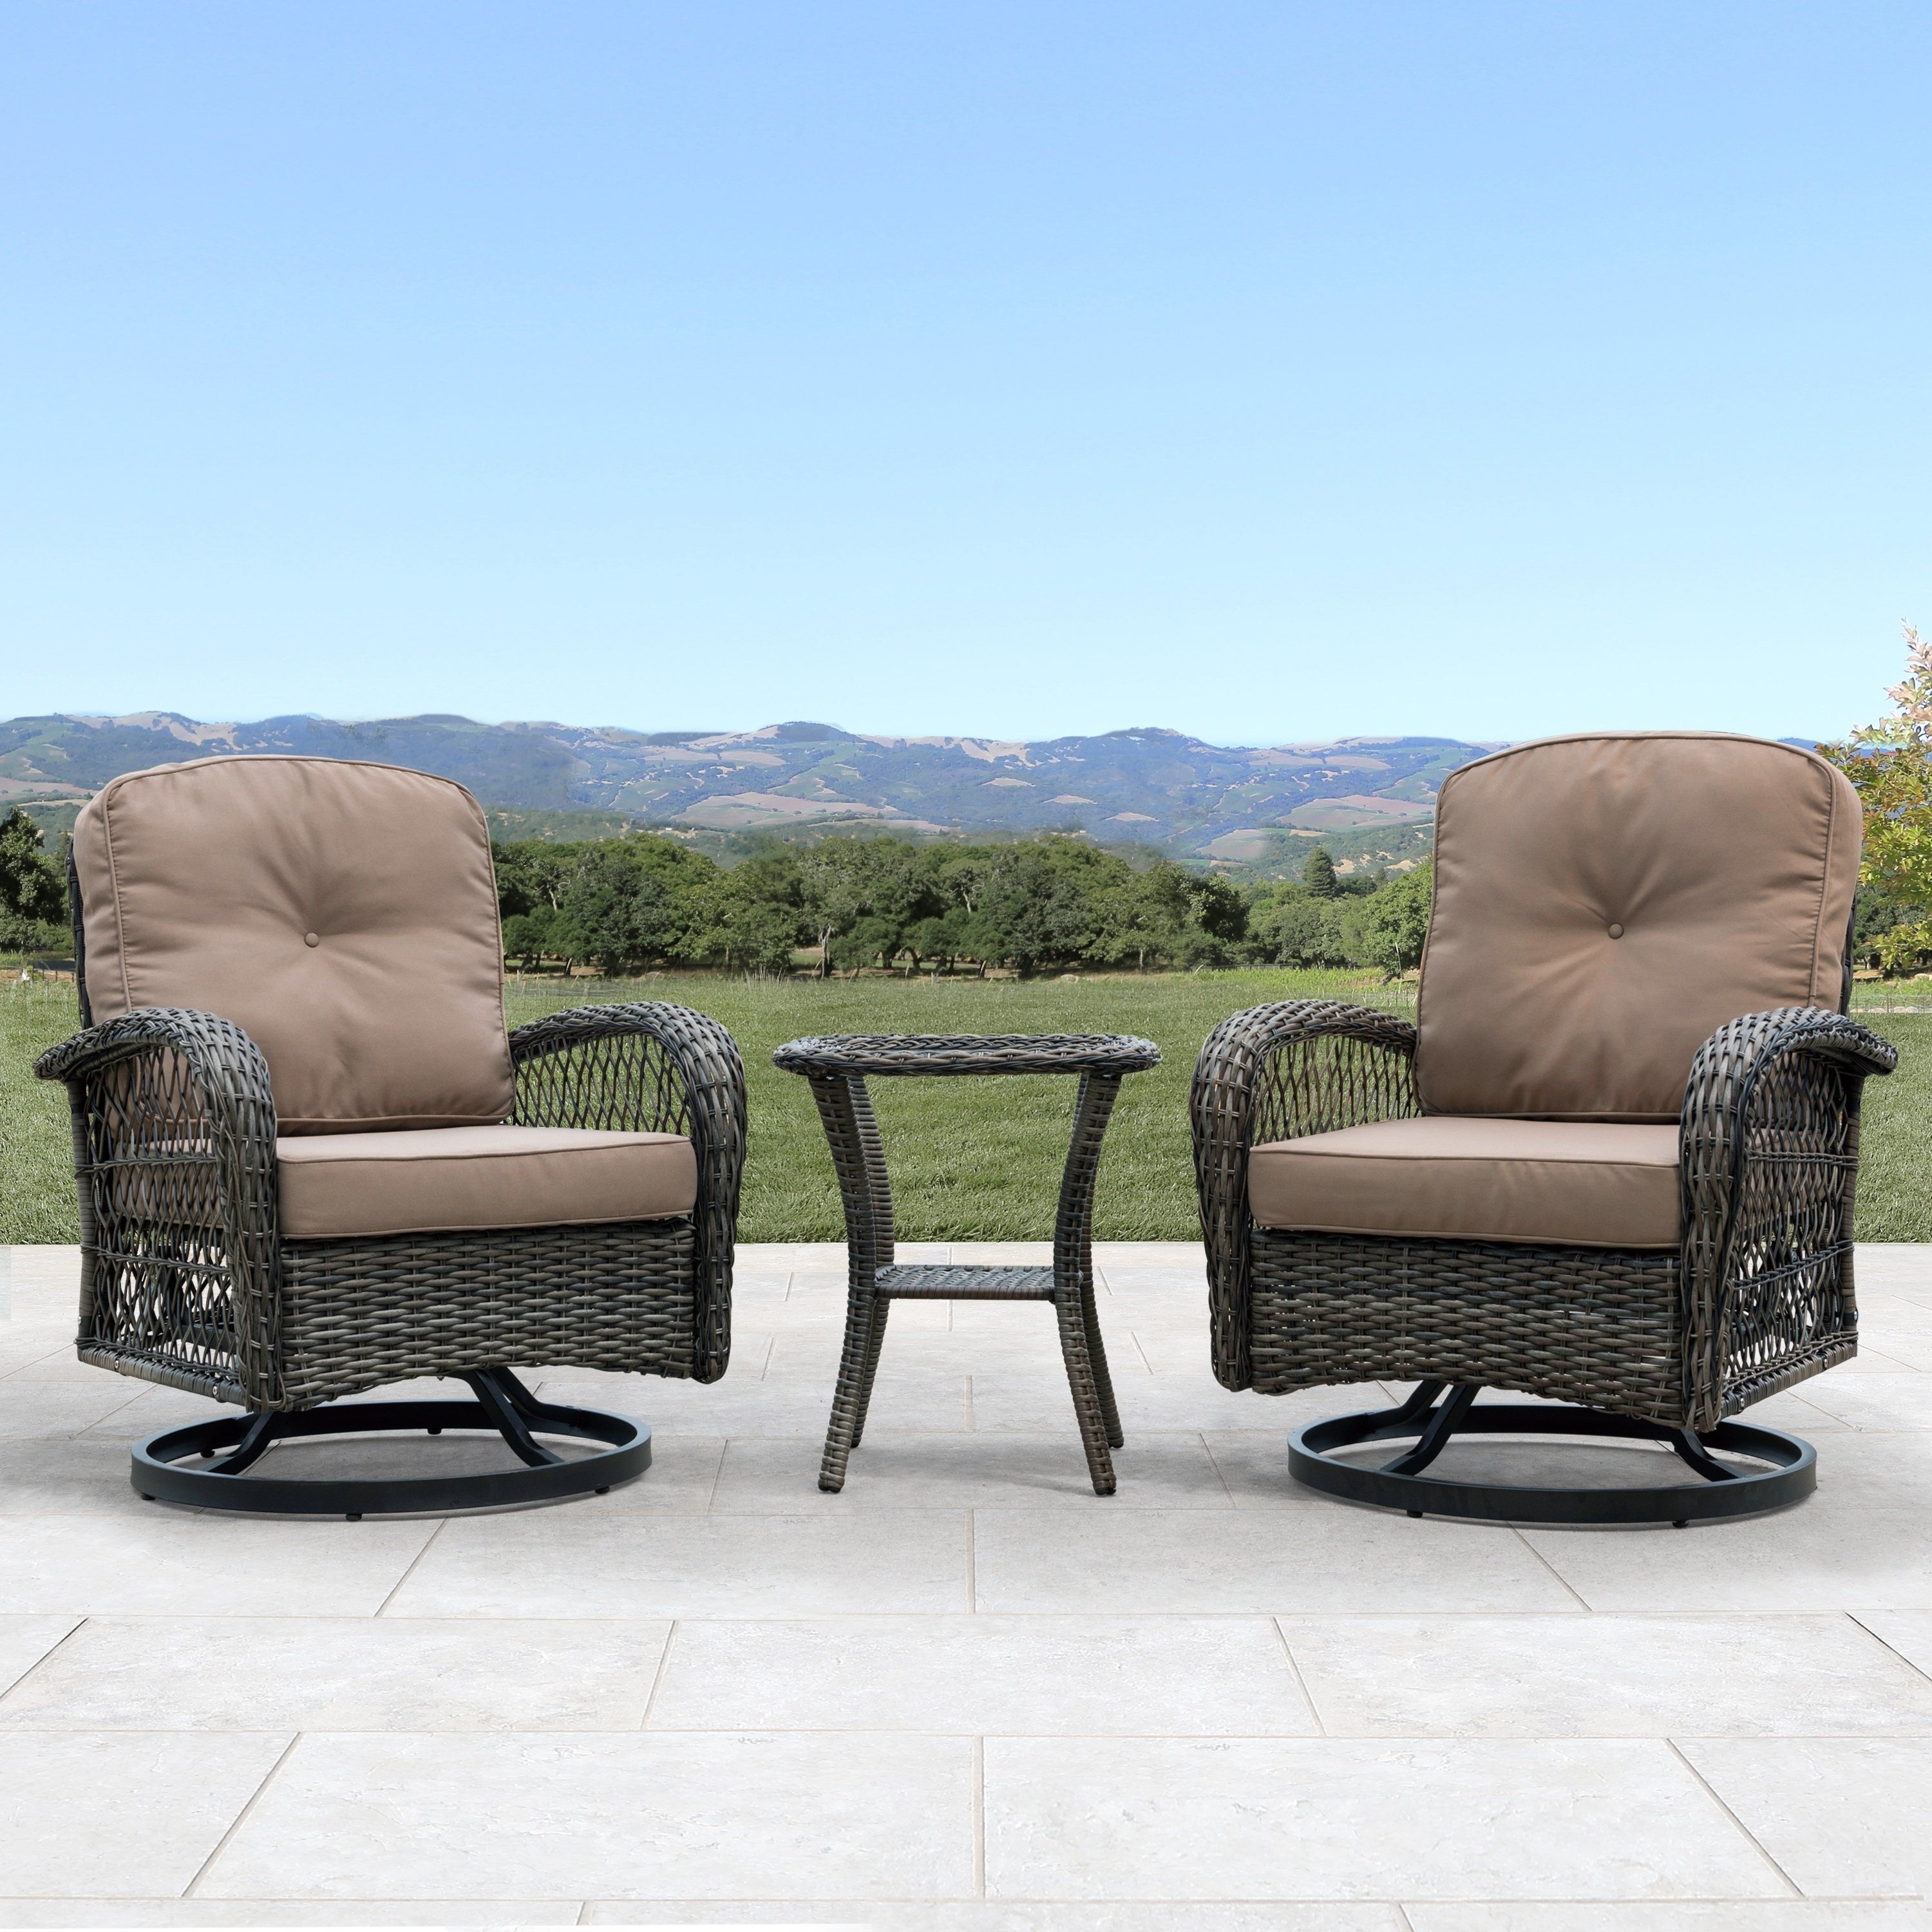 Buy 2 Outdoor Sofas, Chairs & Sectionals Online At Overstock In Alder Grande Ii Swivel Chairs (View 10 of 20)